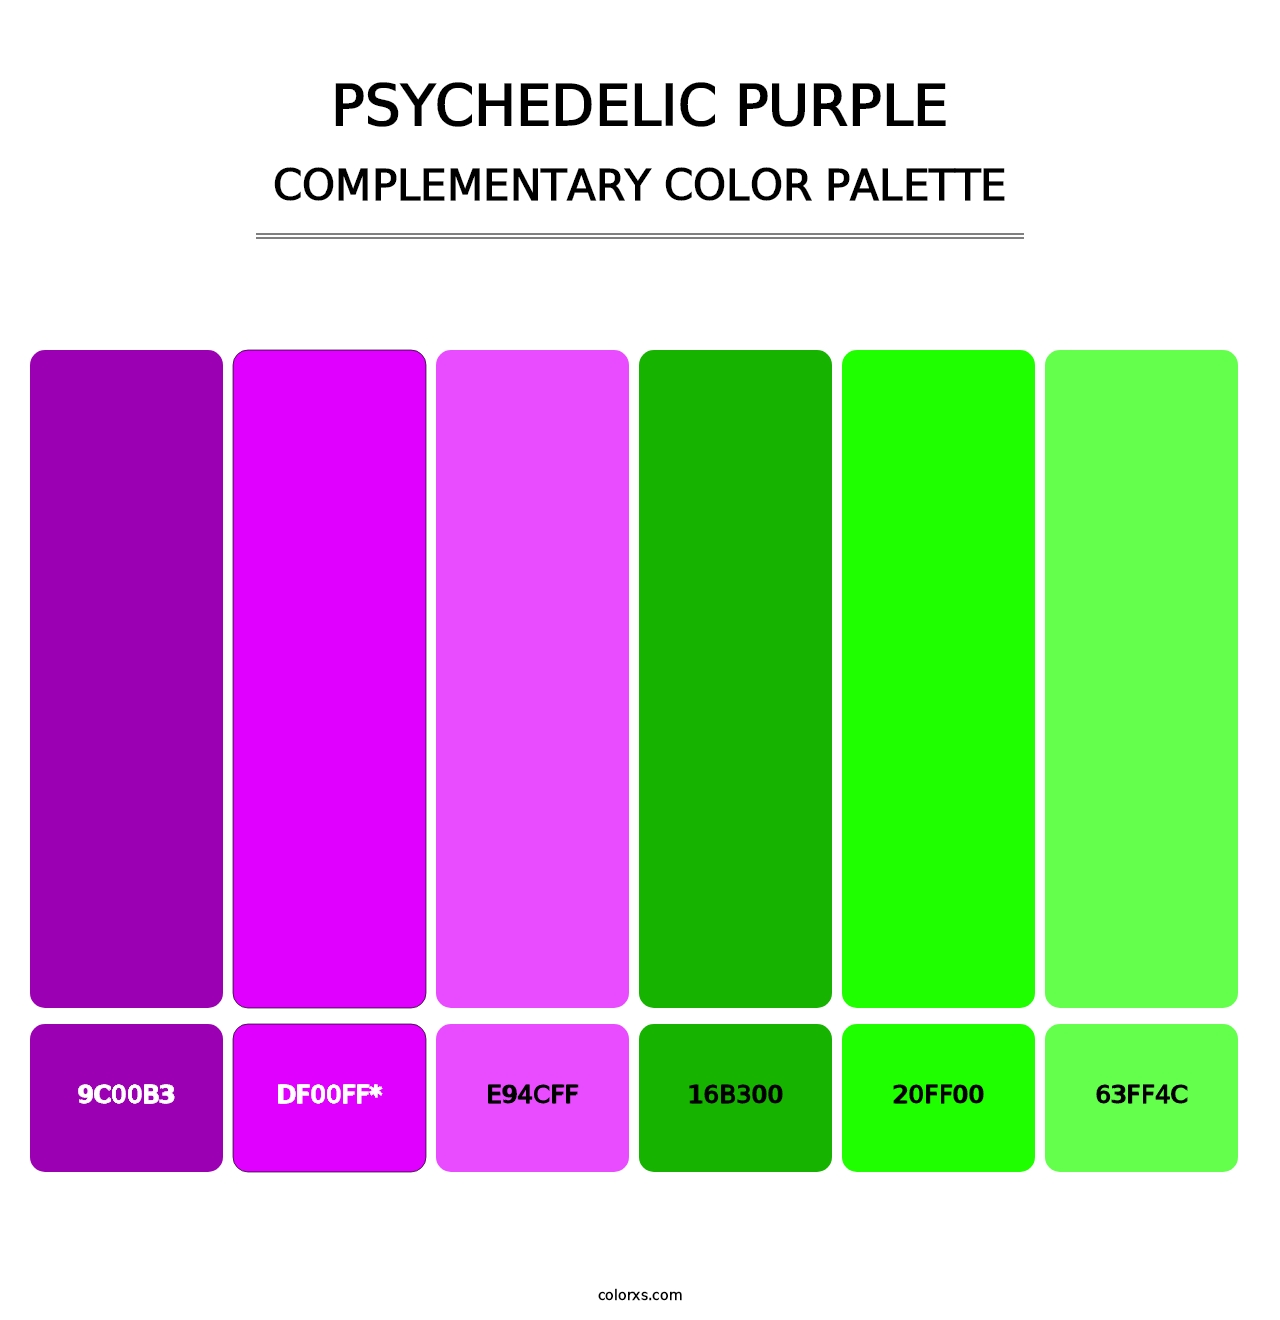 Psychedelic Purple - Complementary Color Palette